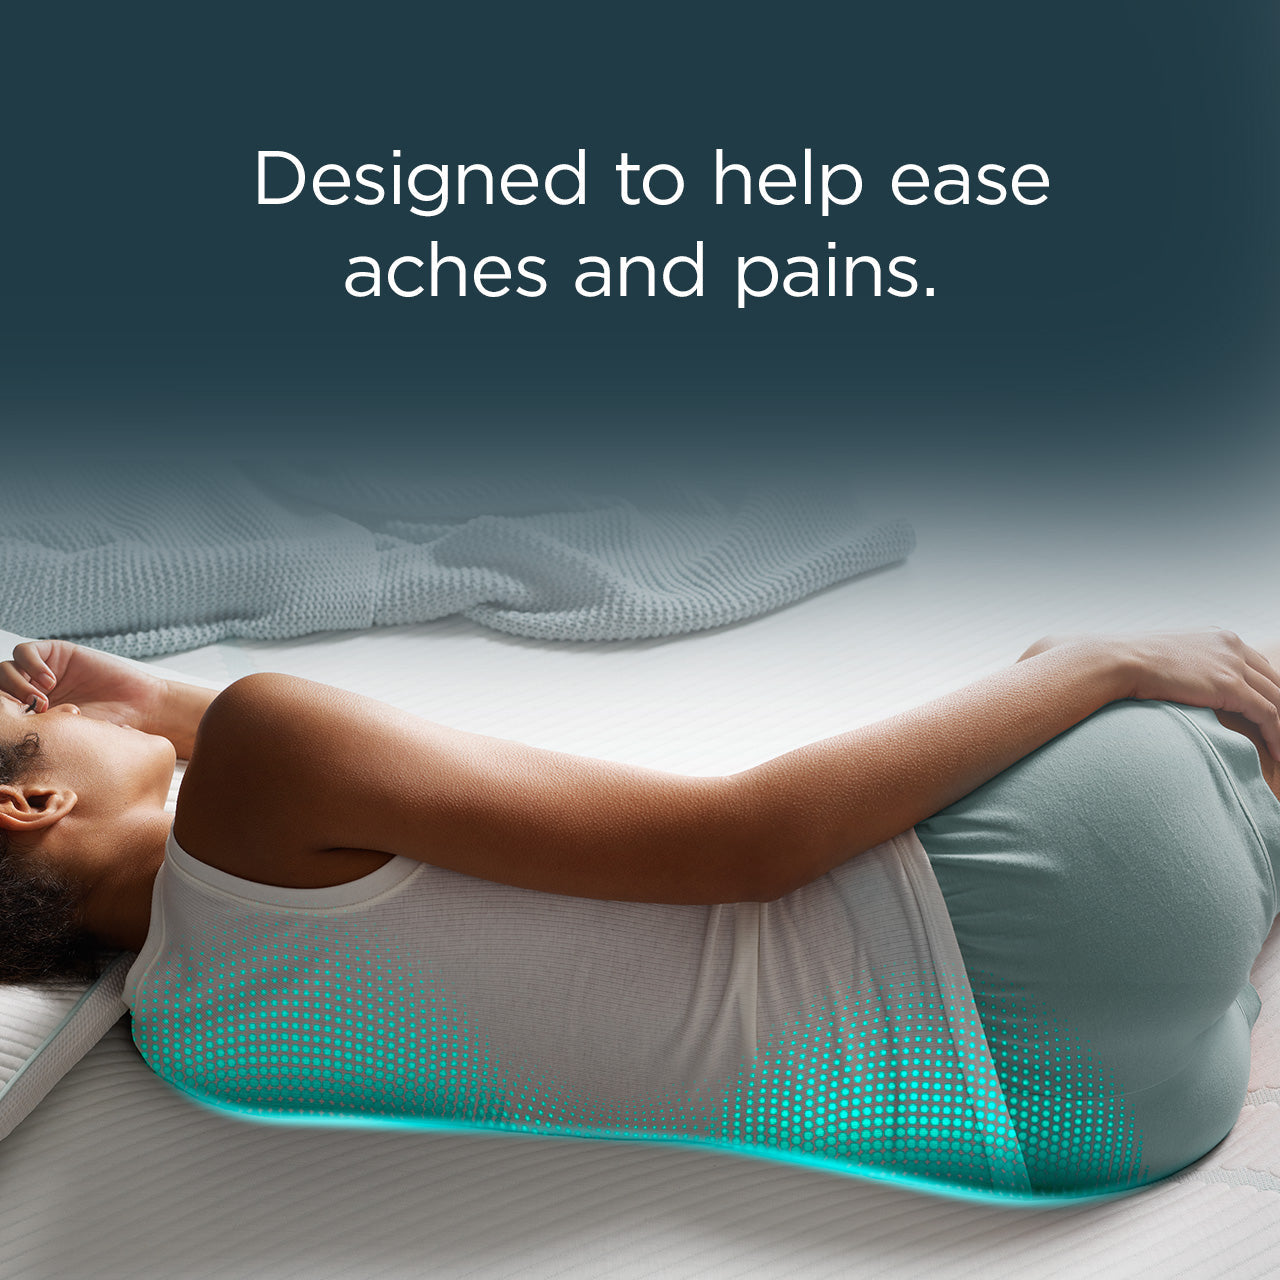 Designed to help ease aches and pains